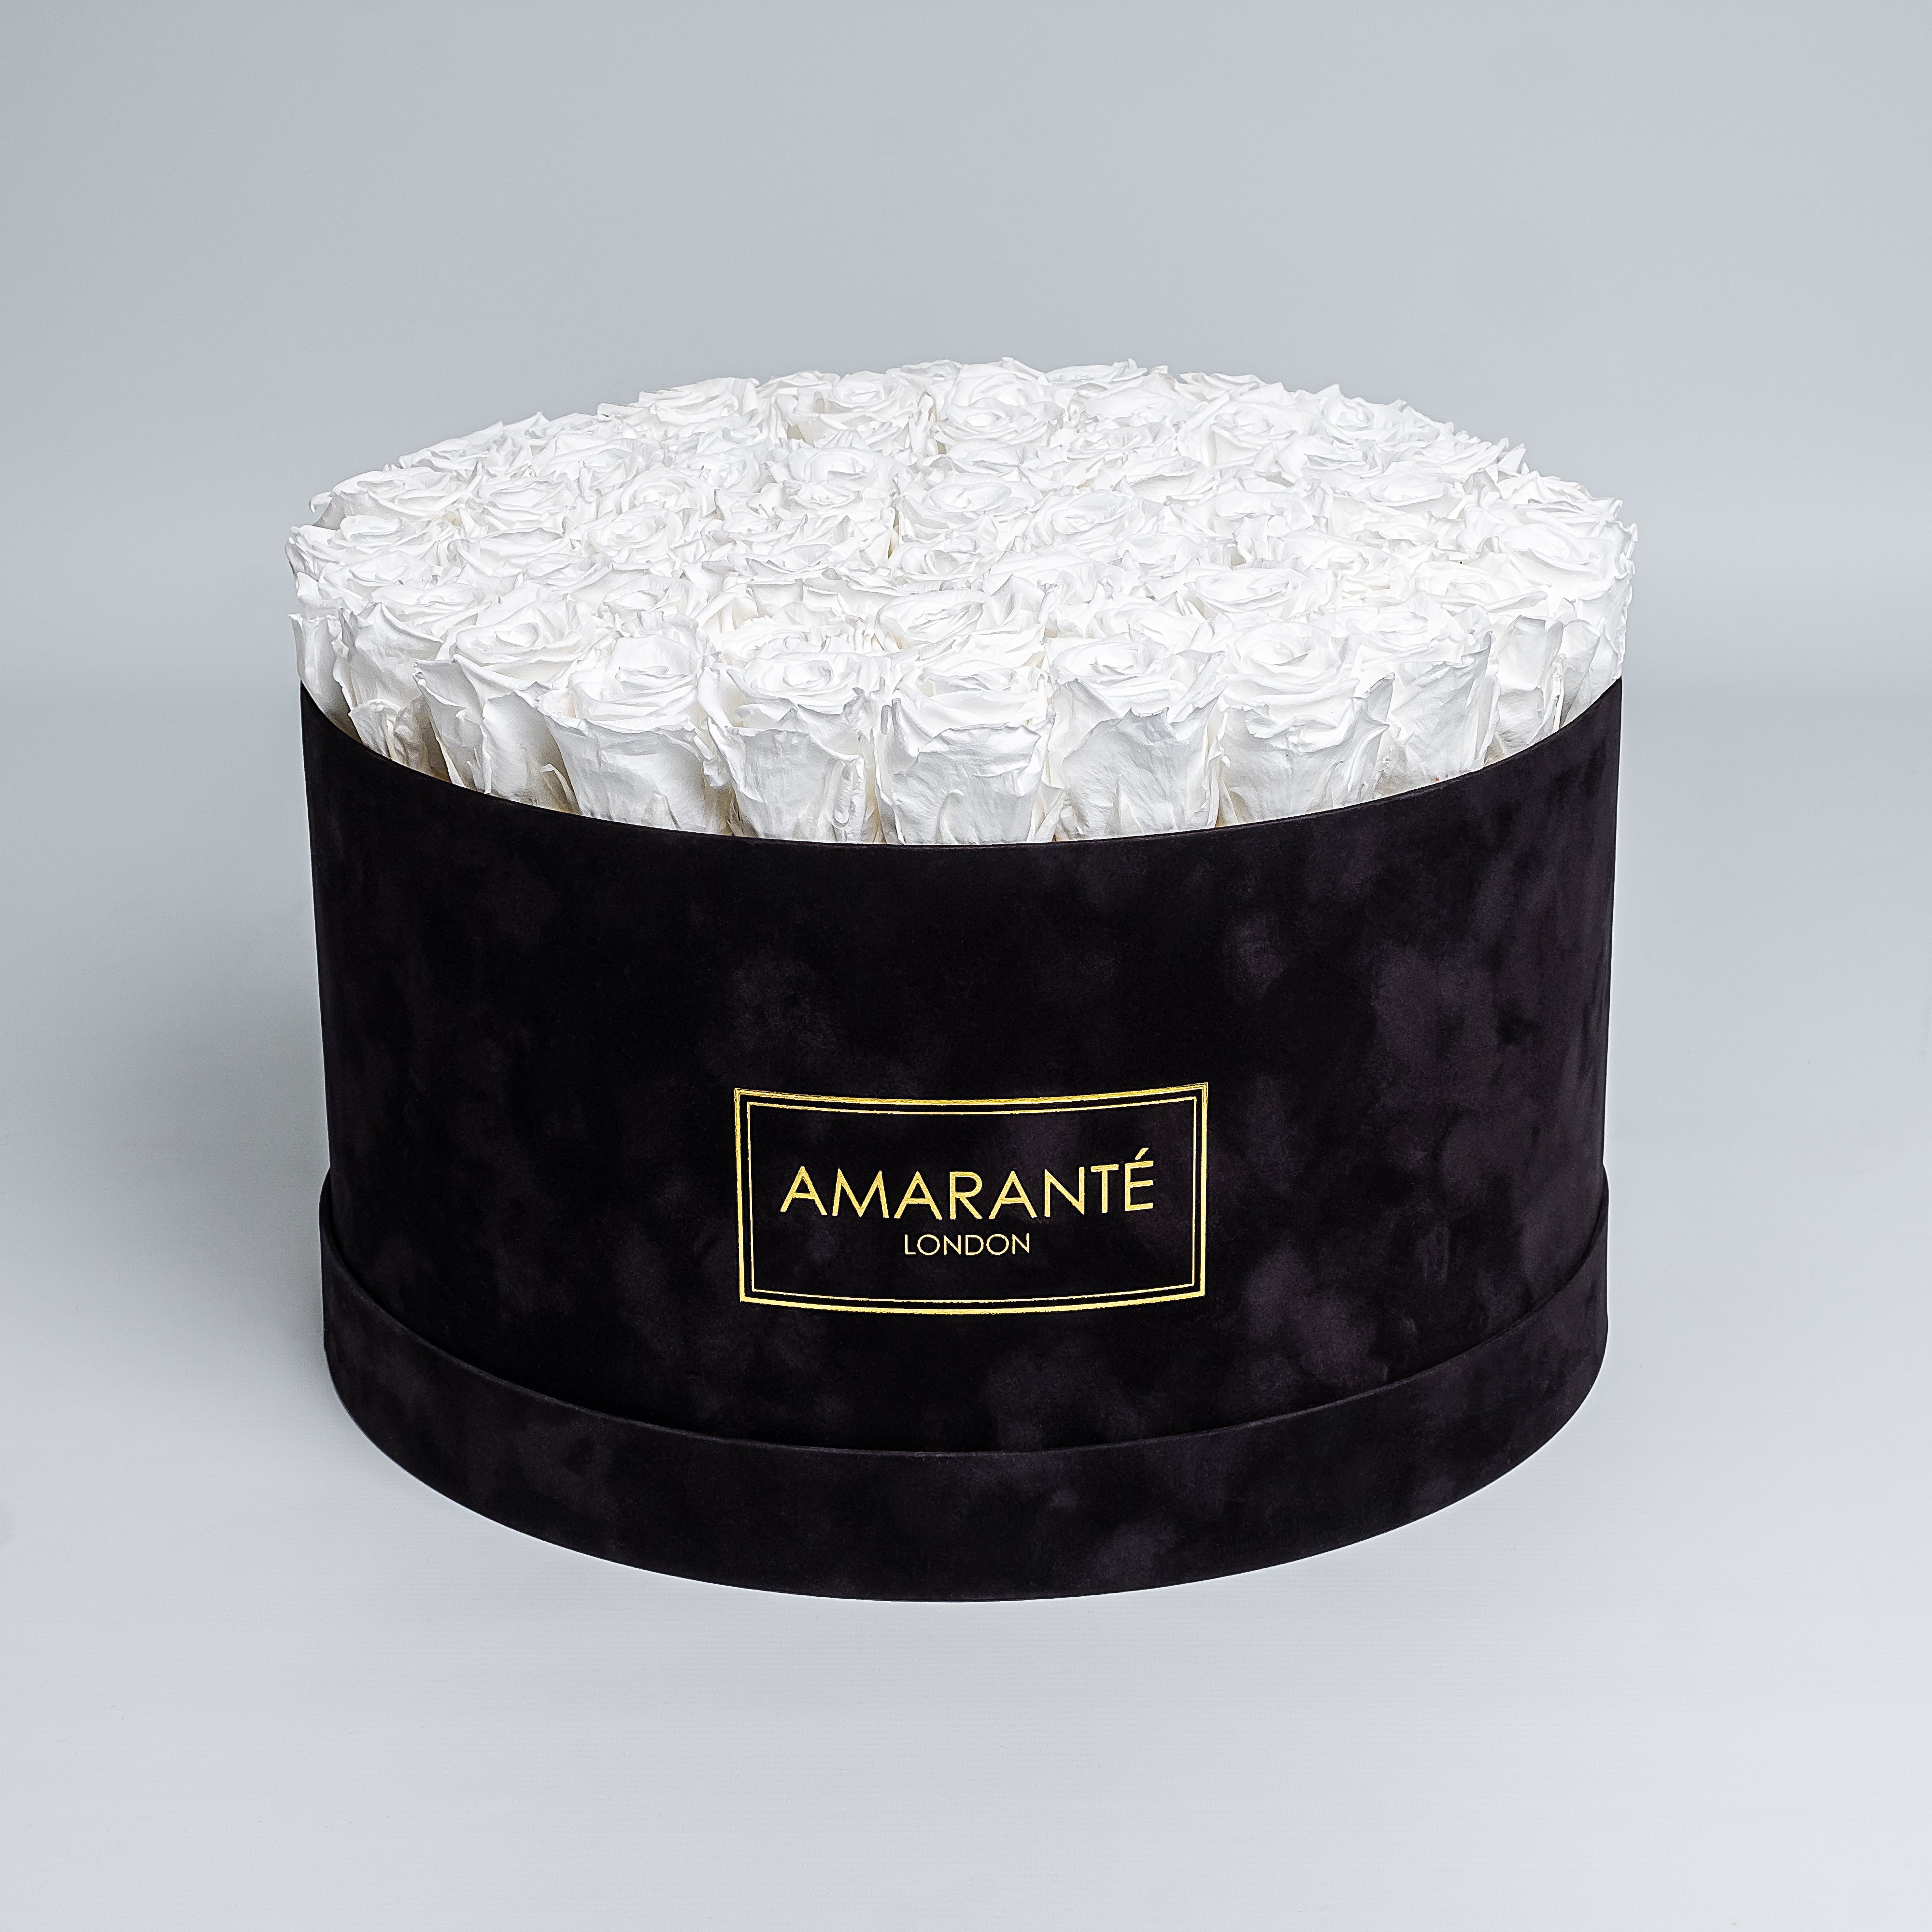 70 Exquisite pure white infinity roses elegantly arranged in a stylish black deluxe suede round rose box. Perfect for expressing timeless love and affection to family, friends and loved ones. Available for free UK delivery.